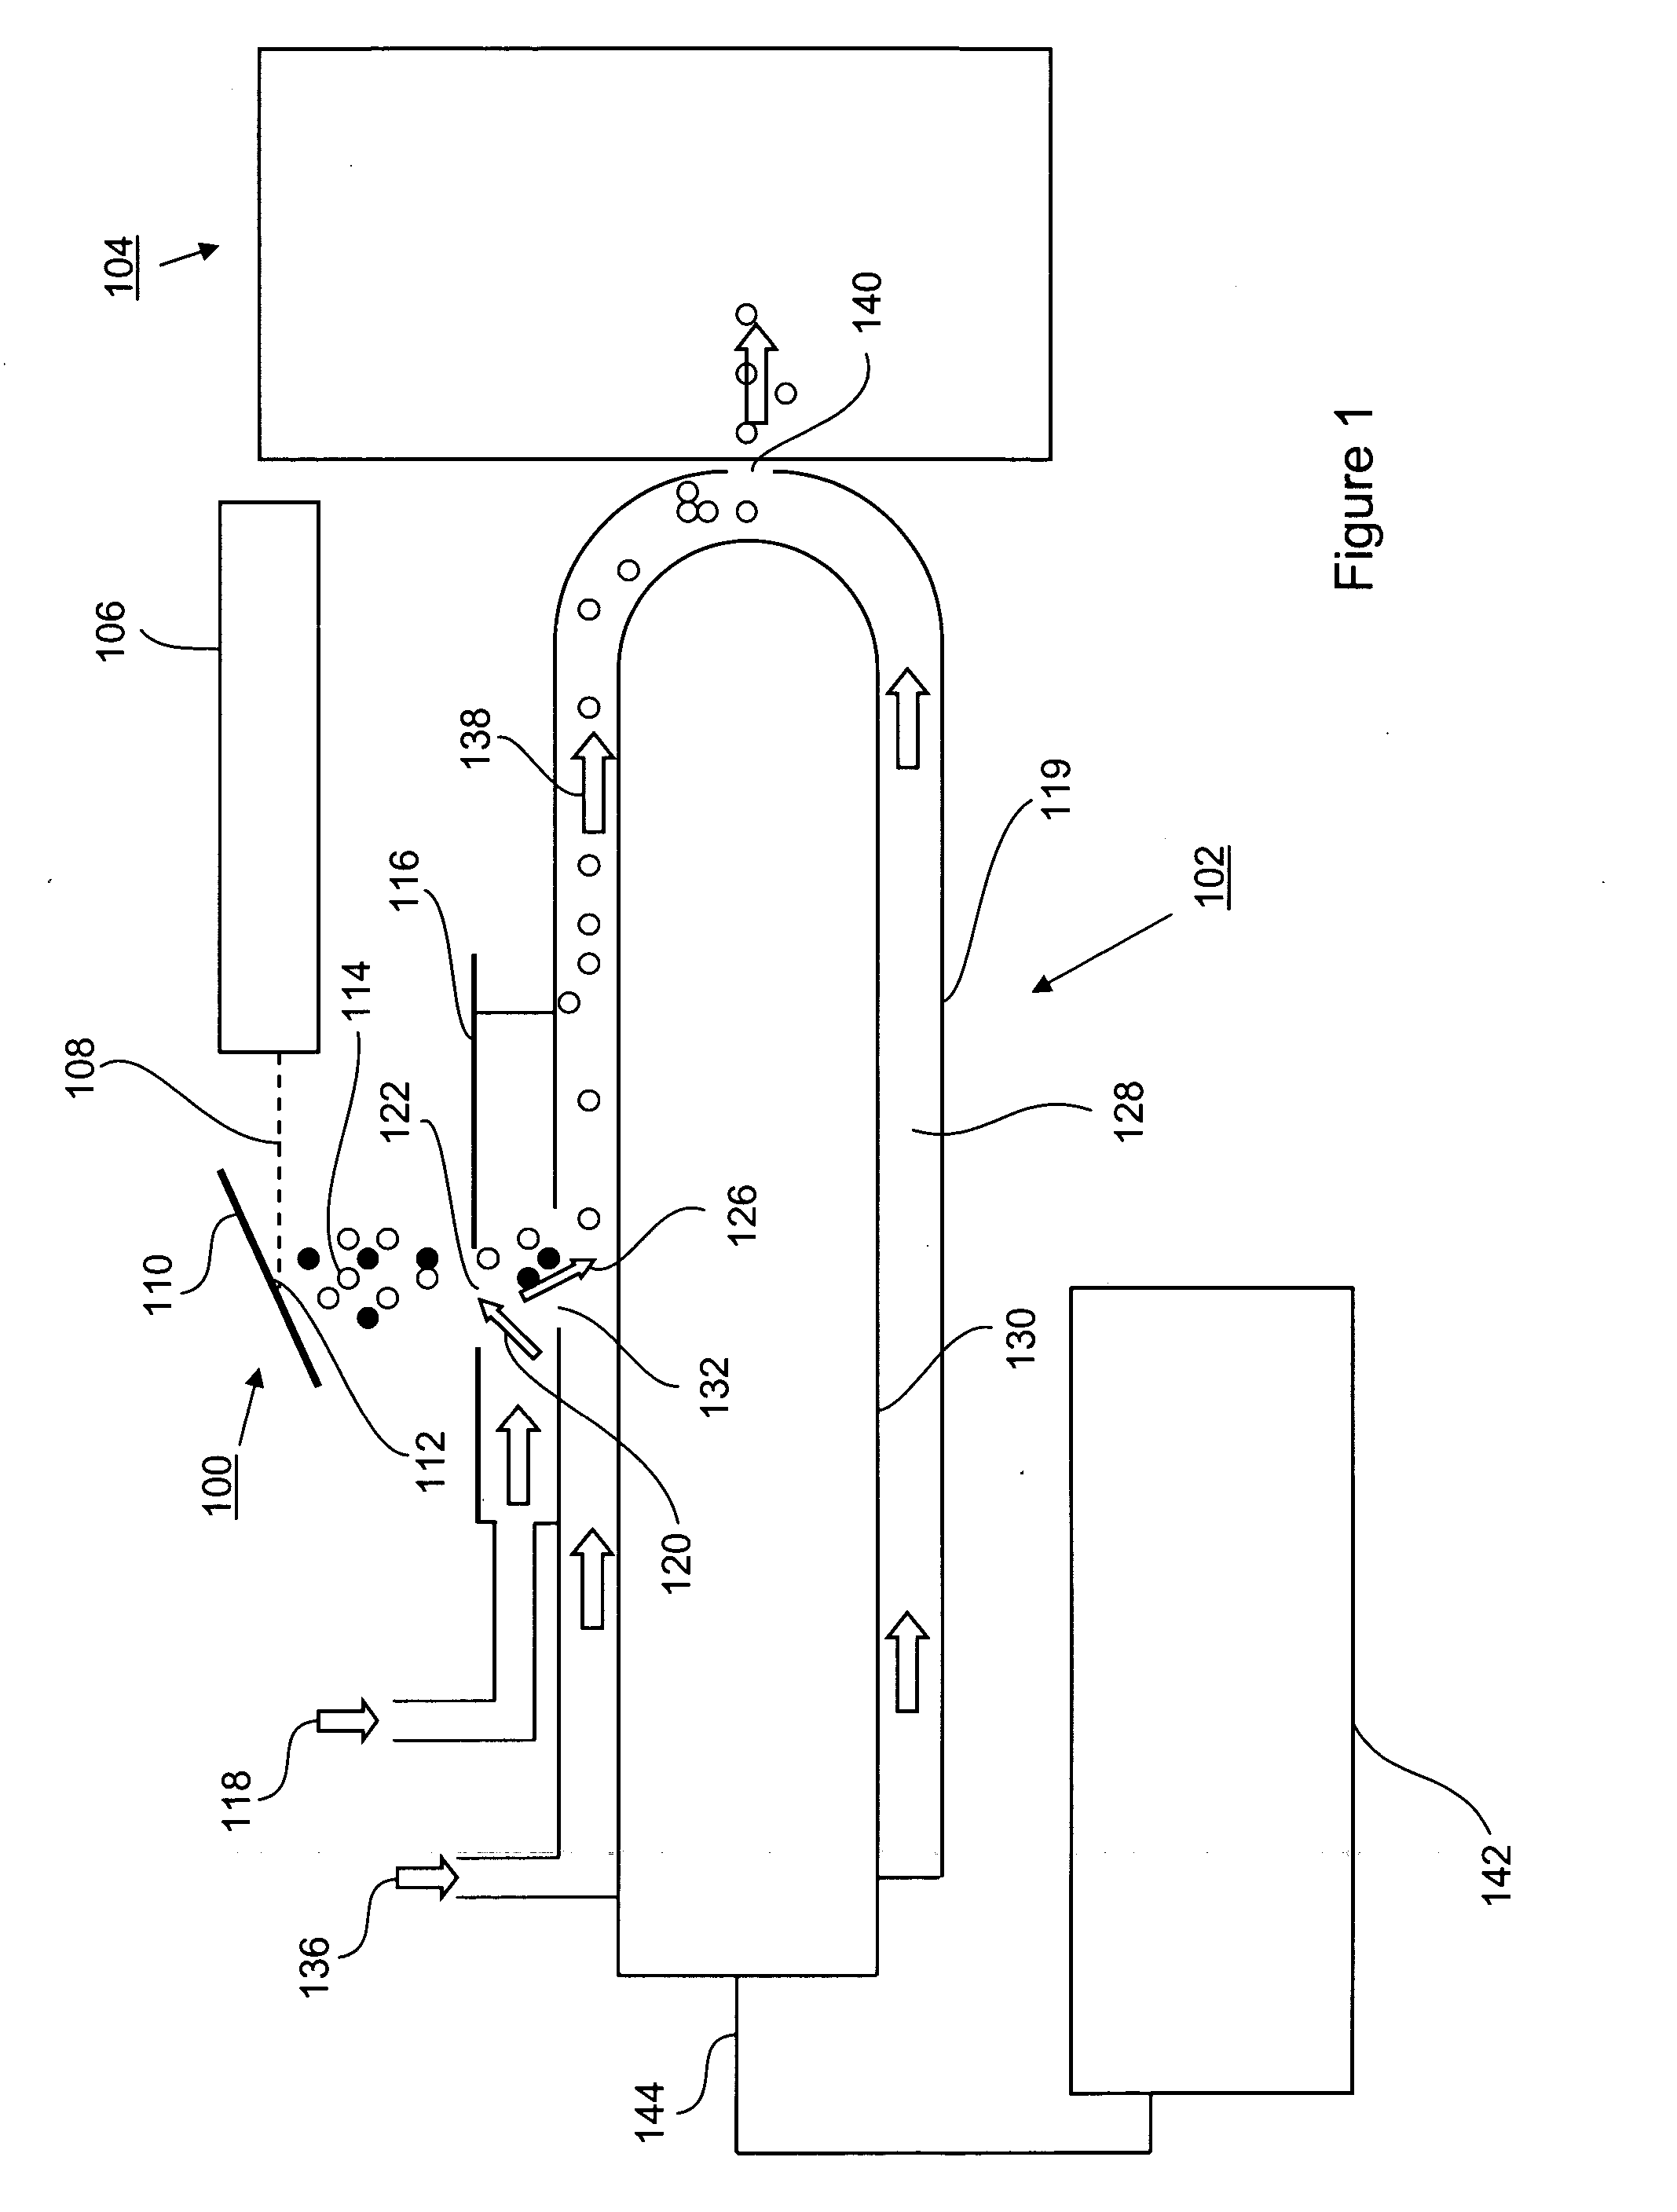 Method and apparatus for FAIMS with a laser-based ionization source